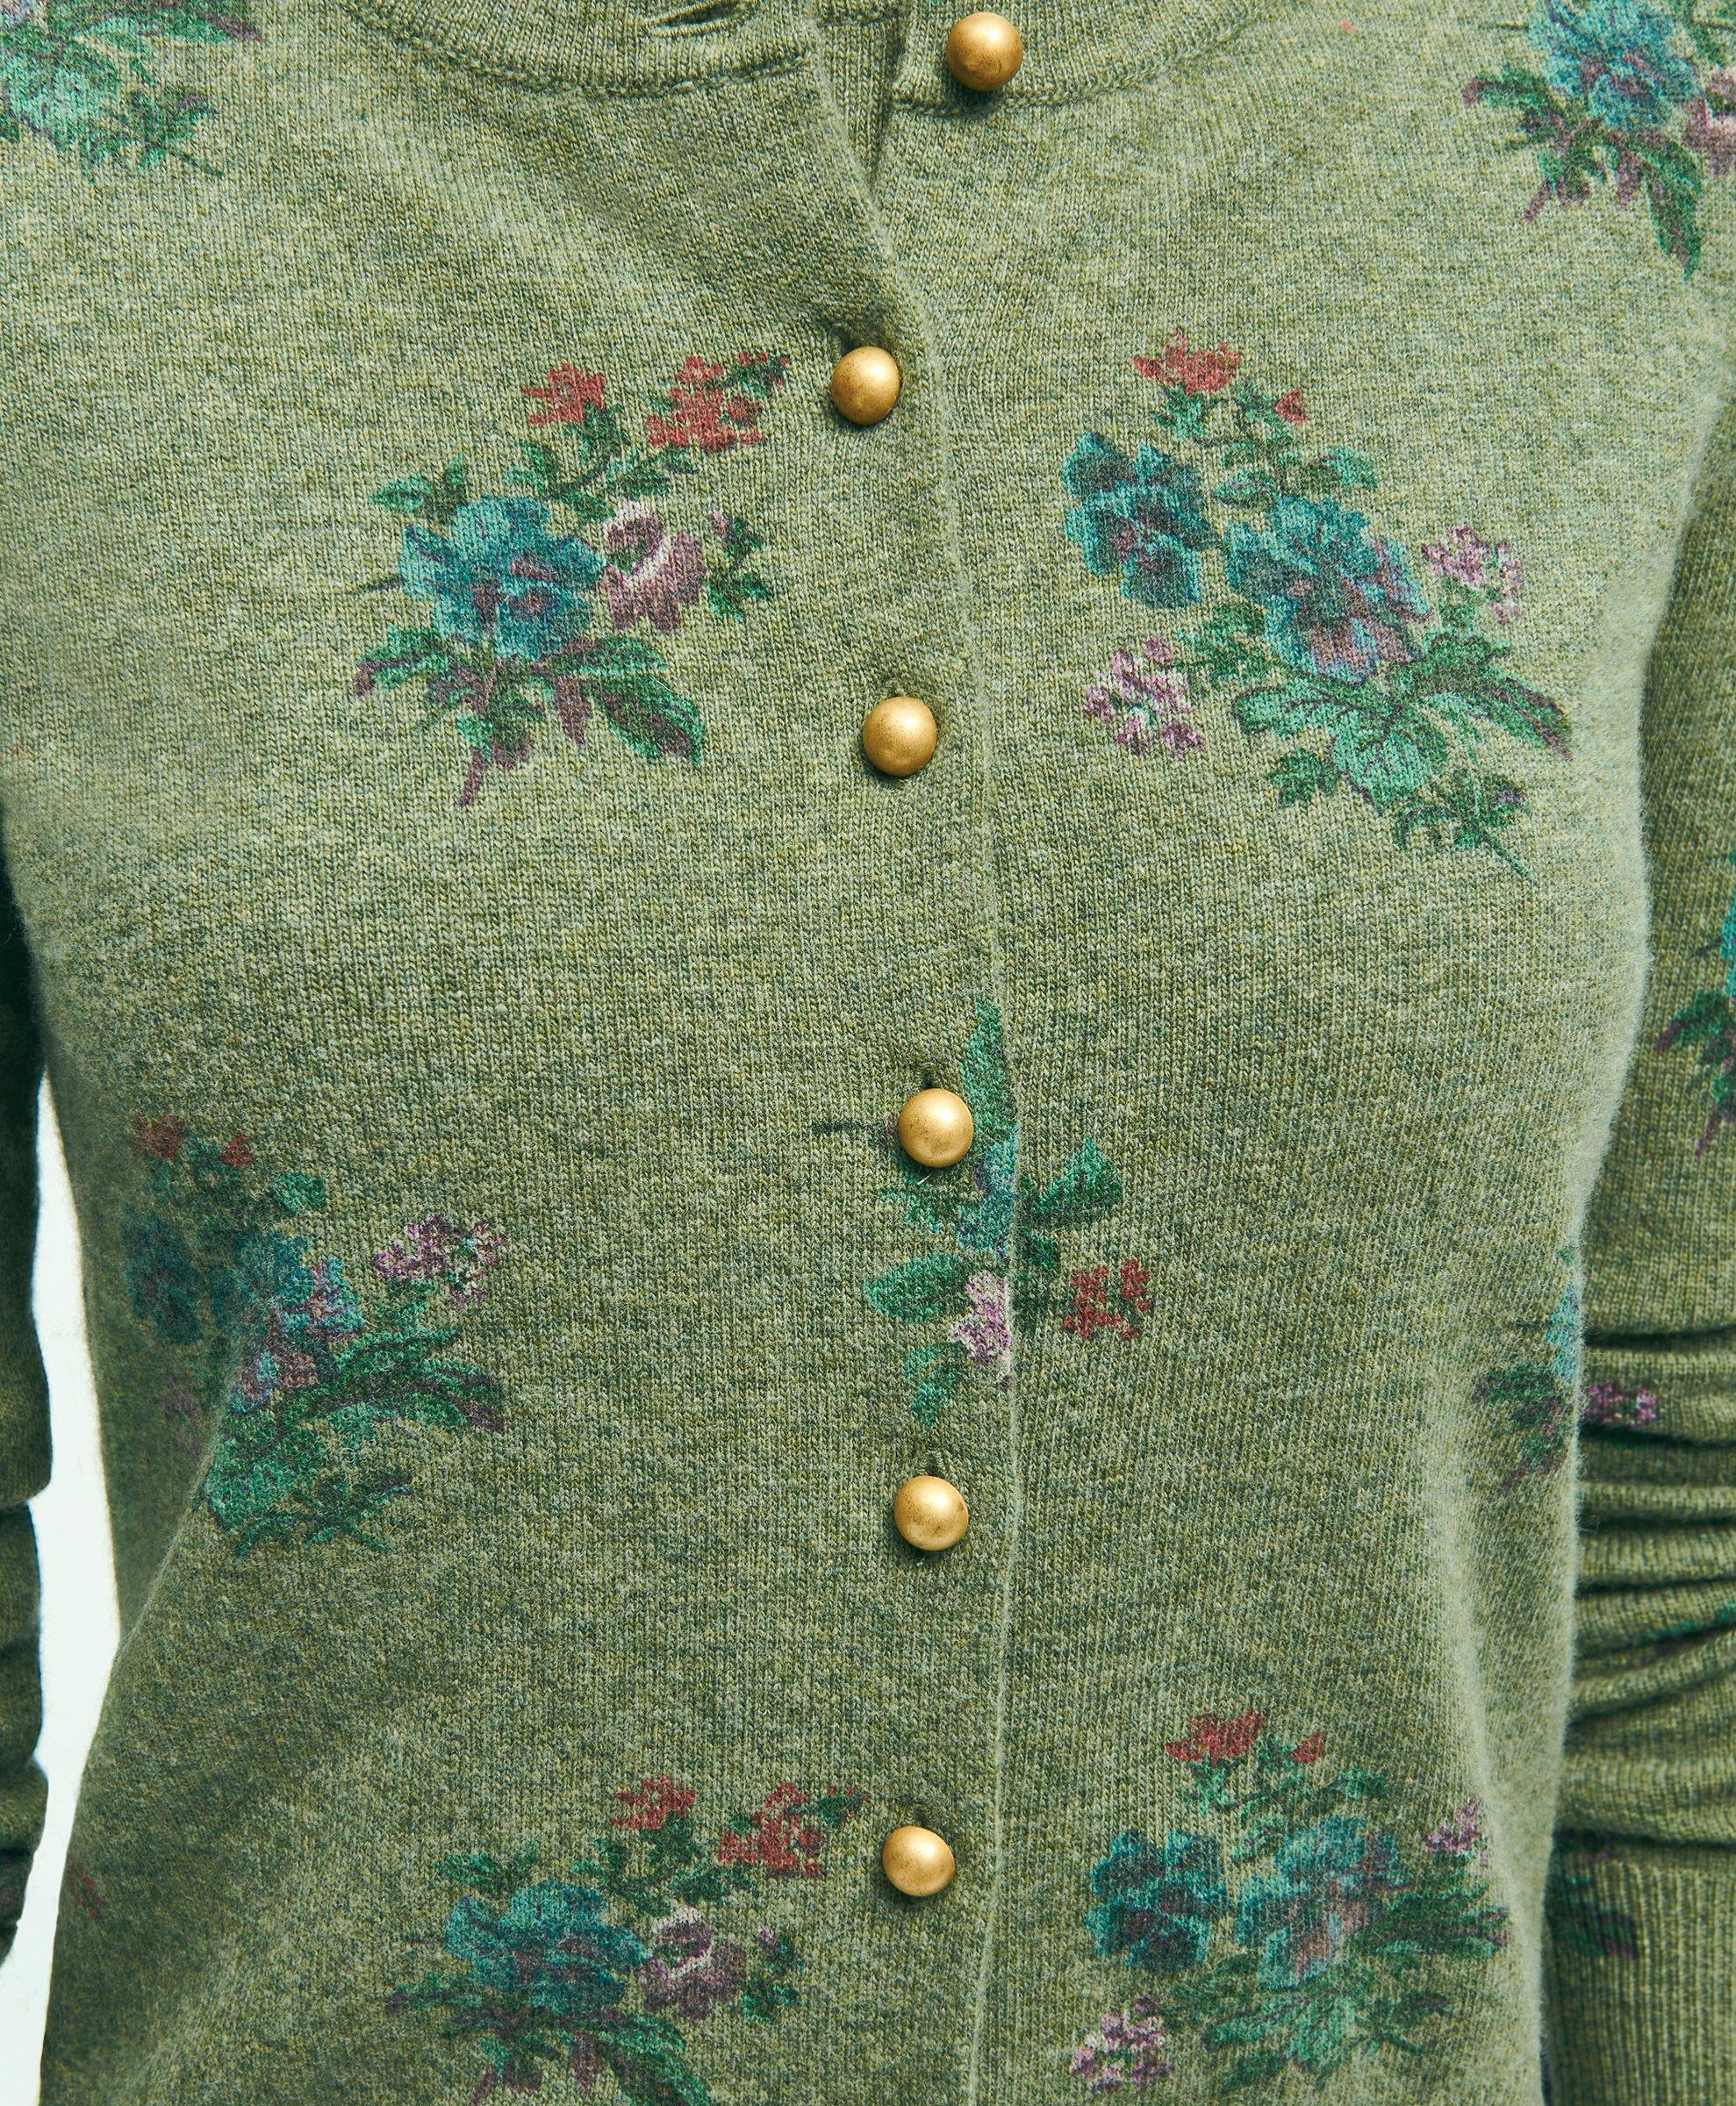 Luxe Floral Embroidered Cardigan